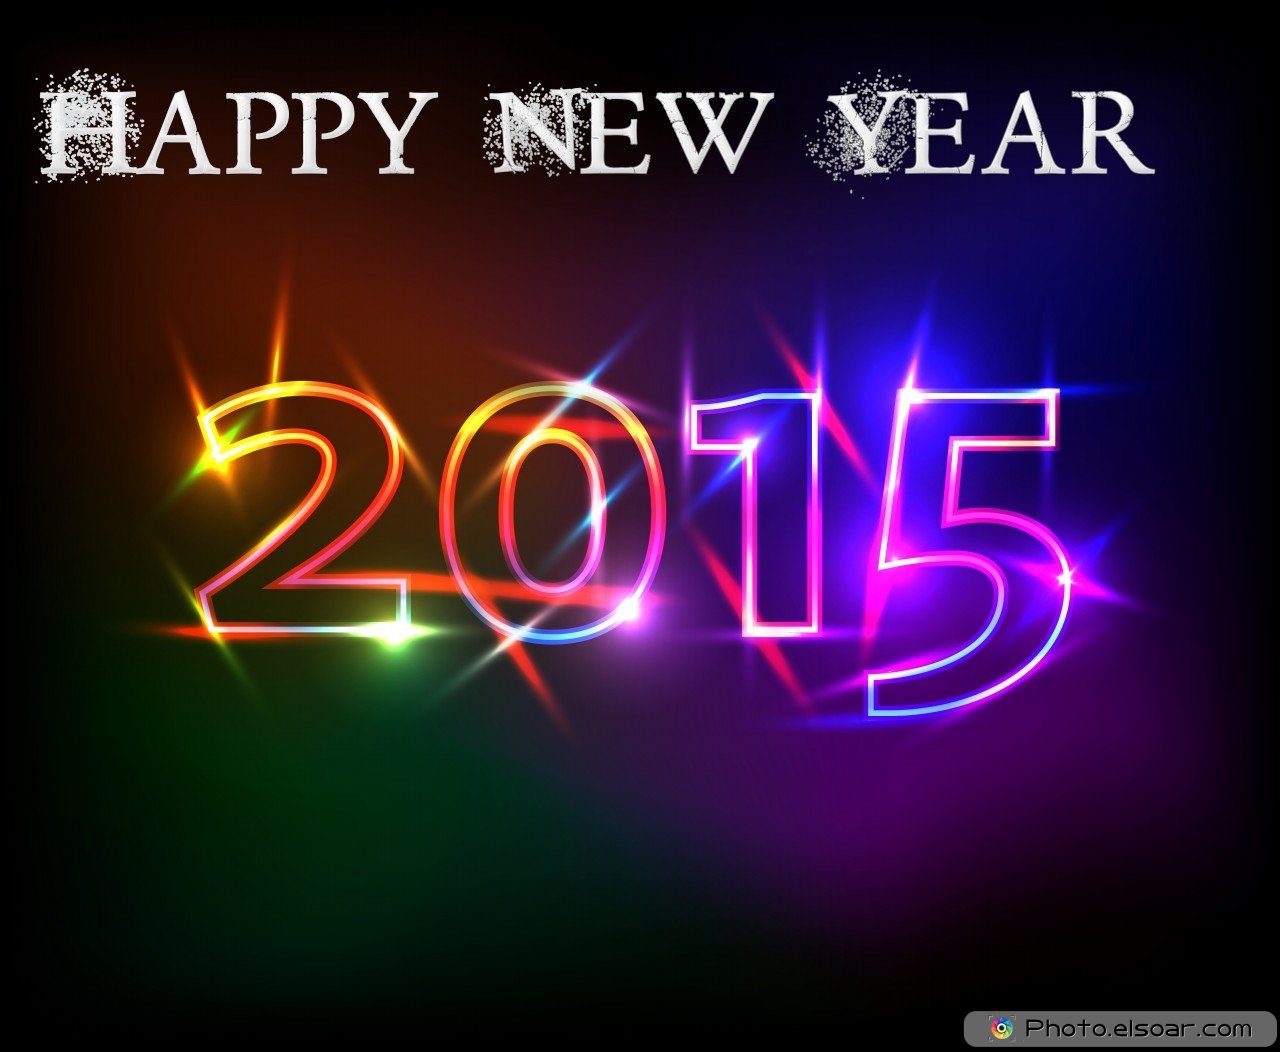 Happy New Year 2015 Hot Colors On Black Backgrounds